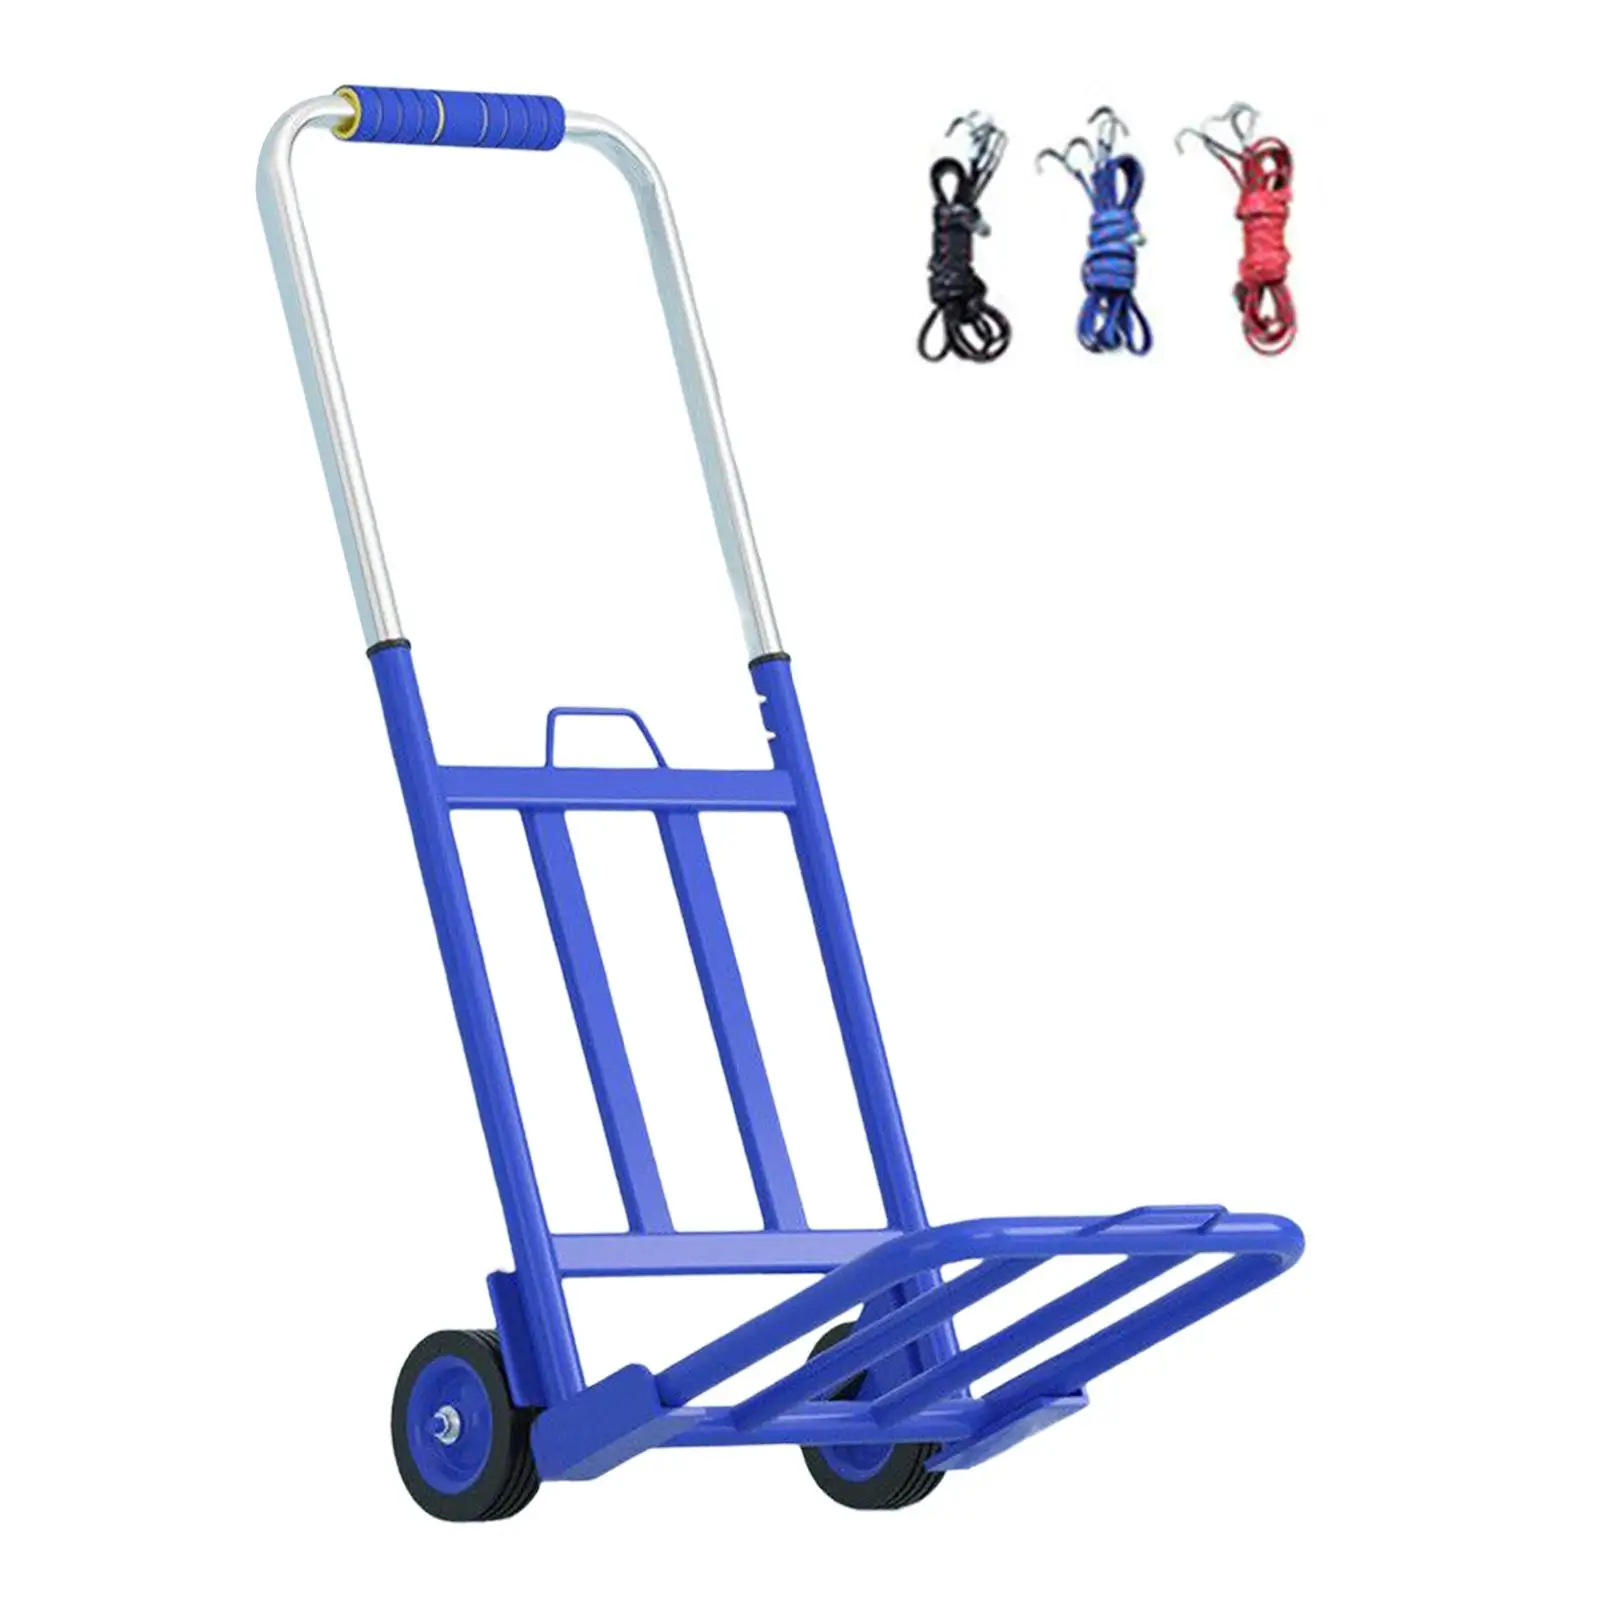 Foldable Hand Cart Adjustable 2 Wheel Compact with Rope Foldable Roller Shopping Trolley for Moving Shopping Transportation